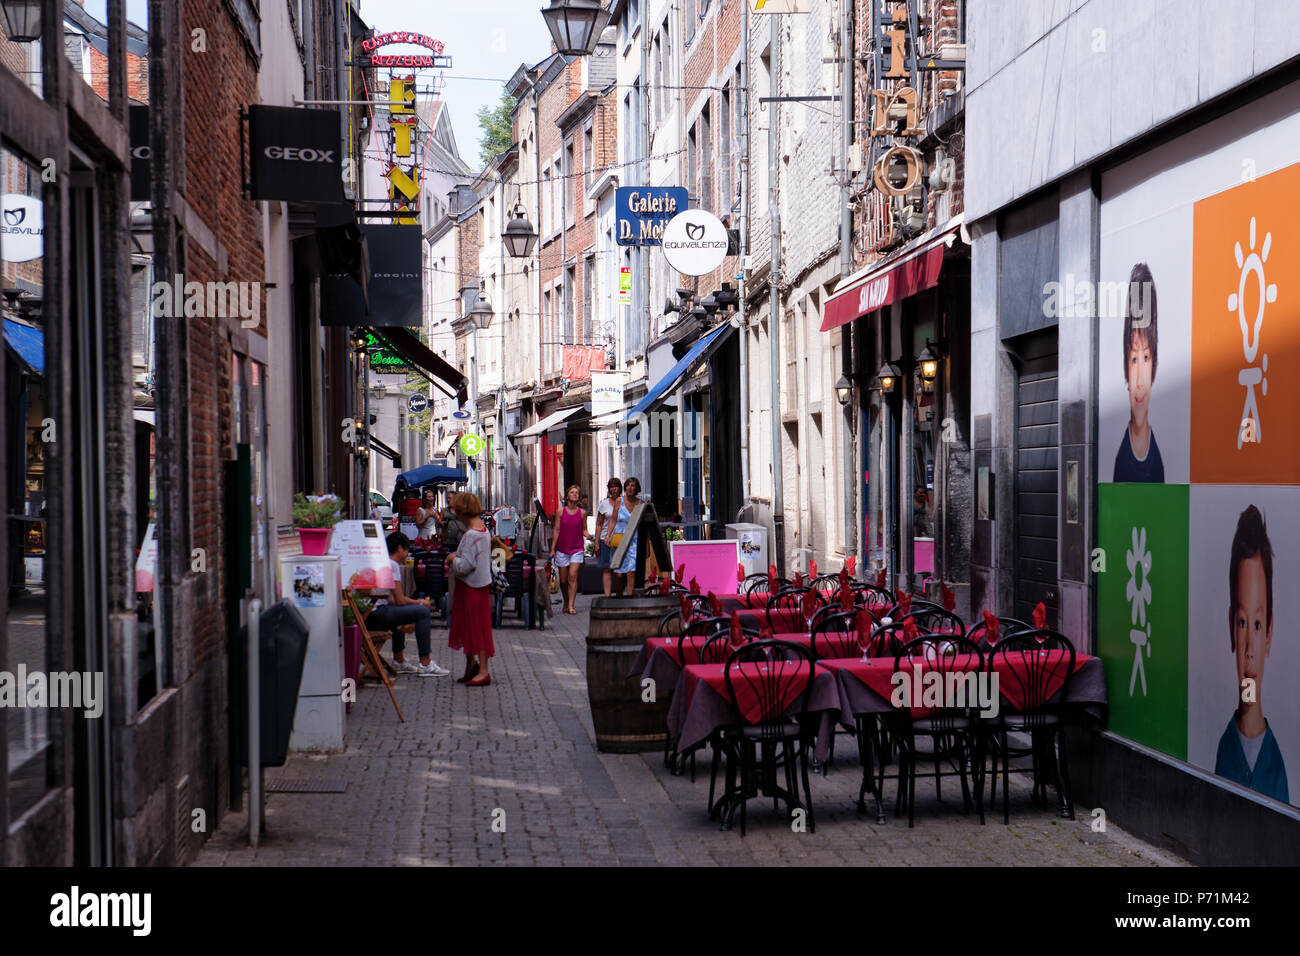 Namur, Belgium. 3 July, 2018. Touristic street with restaurants in center of Namur, Belgium. Beginning of July in 2018 is extremely hot in Belgium. Stock Photo